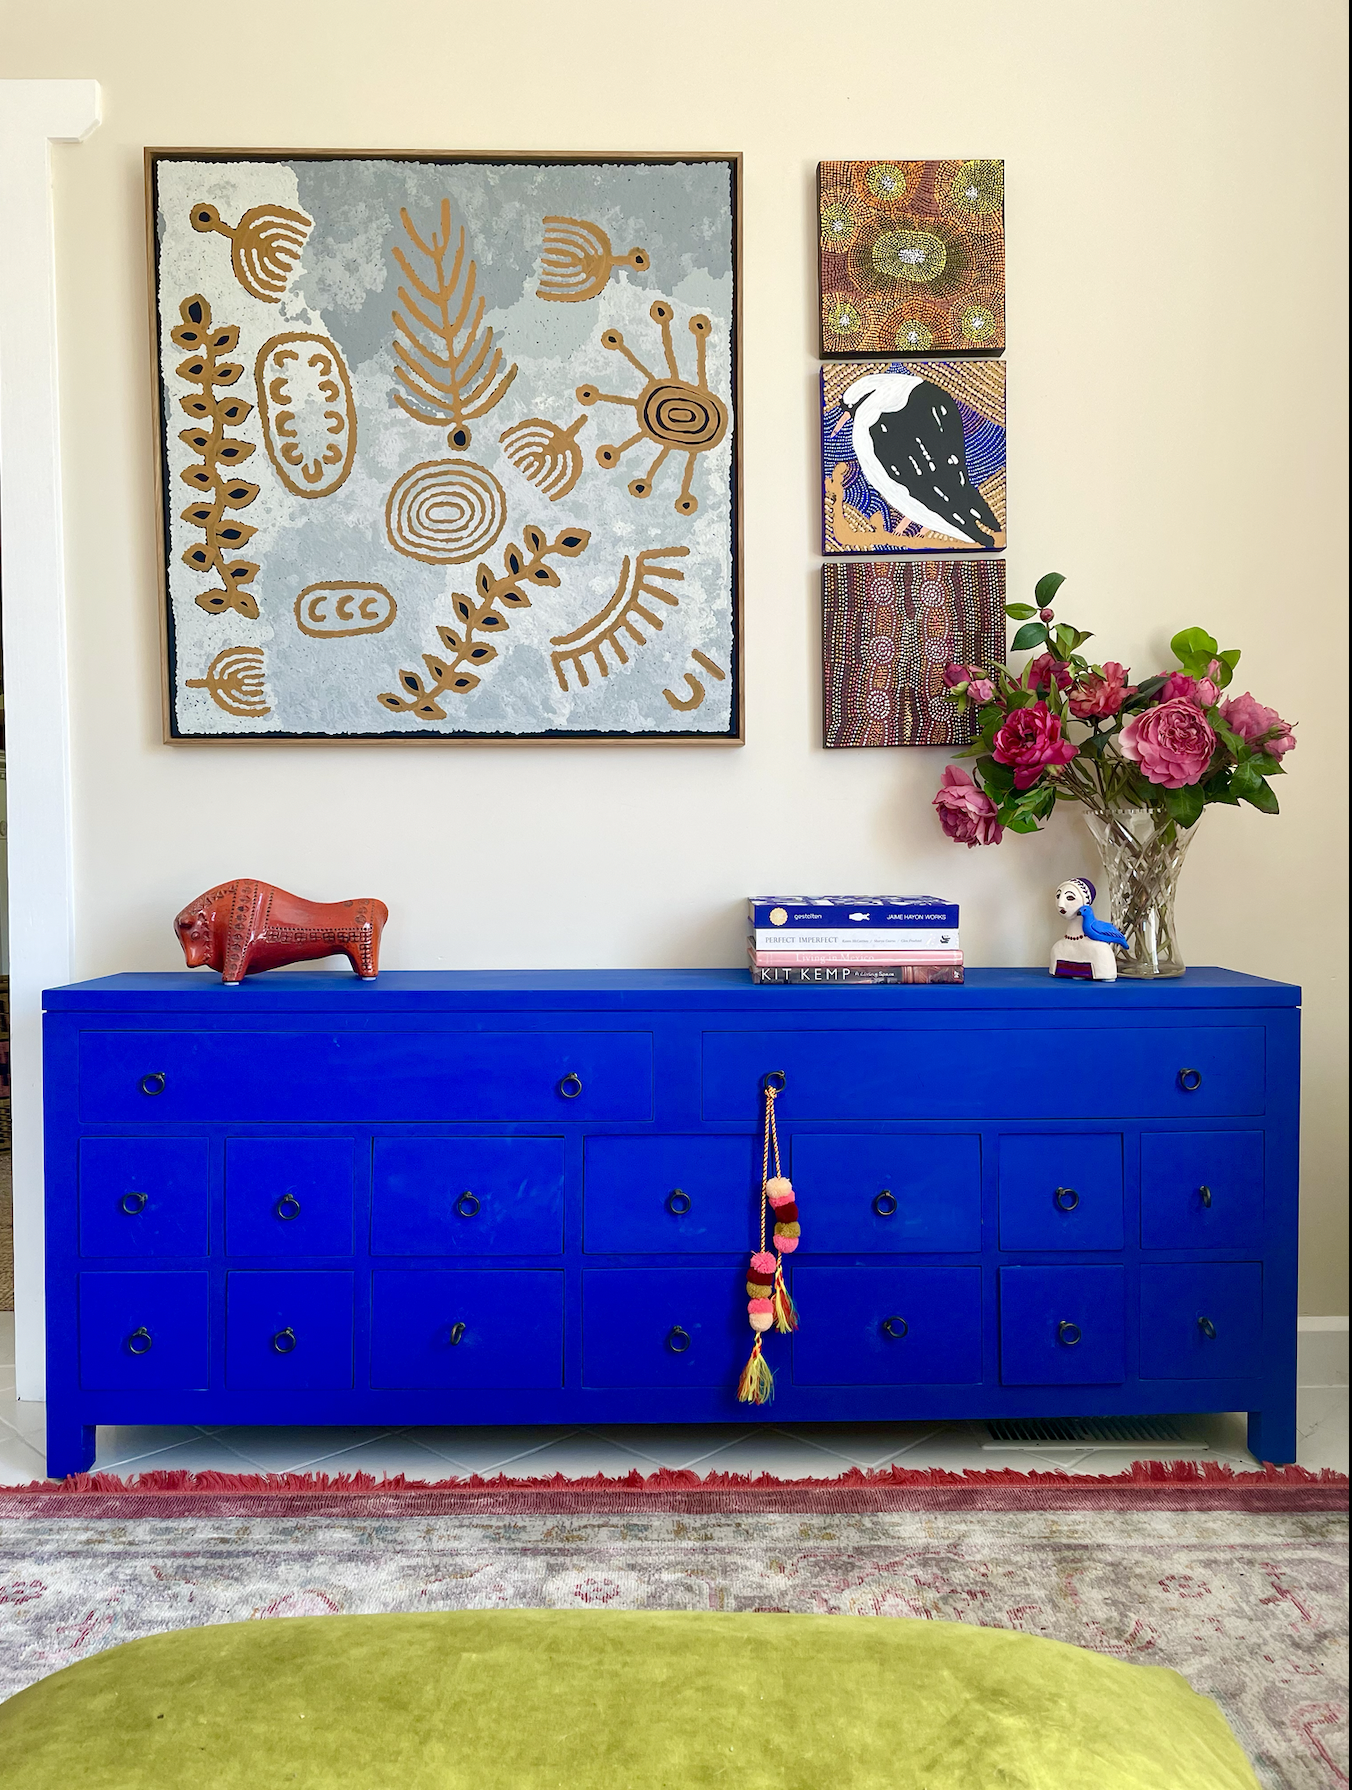 Mountain house - Klein sideboard.png